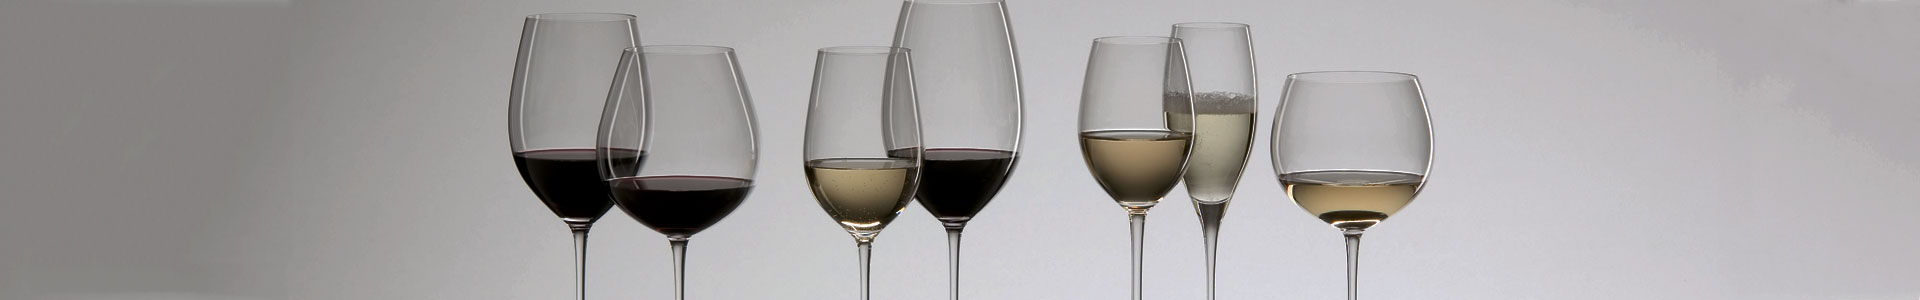 Wine glasses from the Vinum series by Riedel for white and red wines.